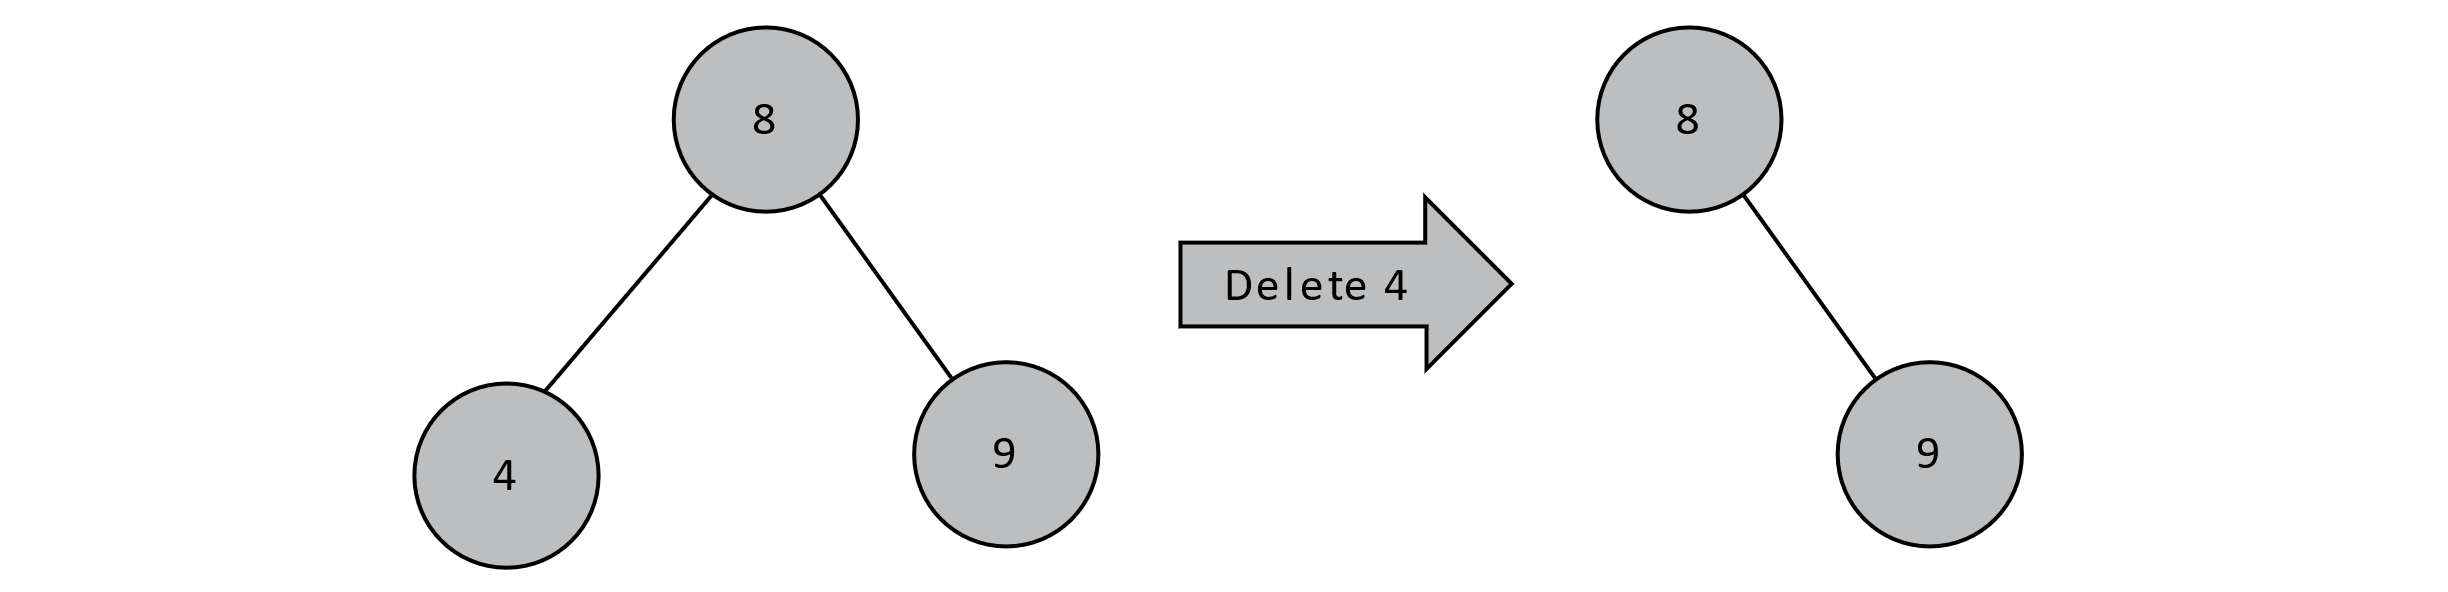 Deleting a leaf node from a BST by simply removing the link to the node.